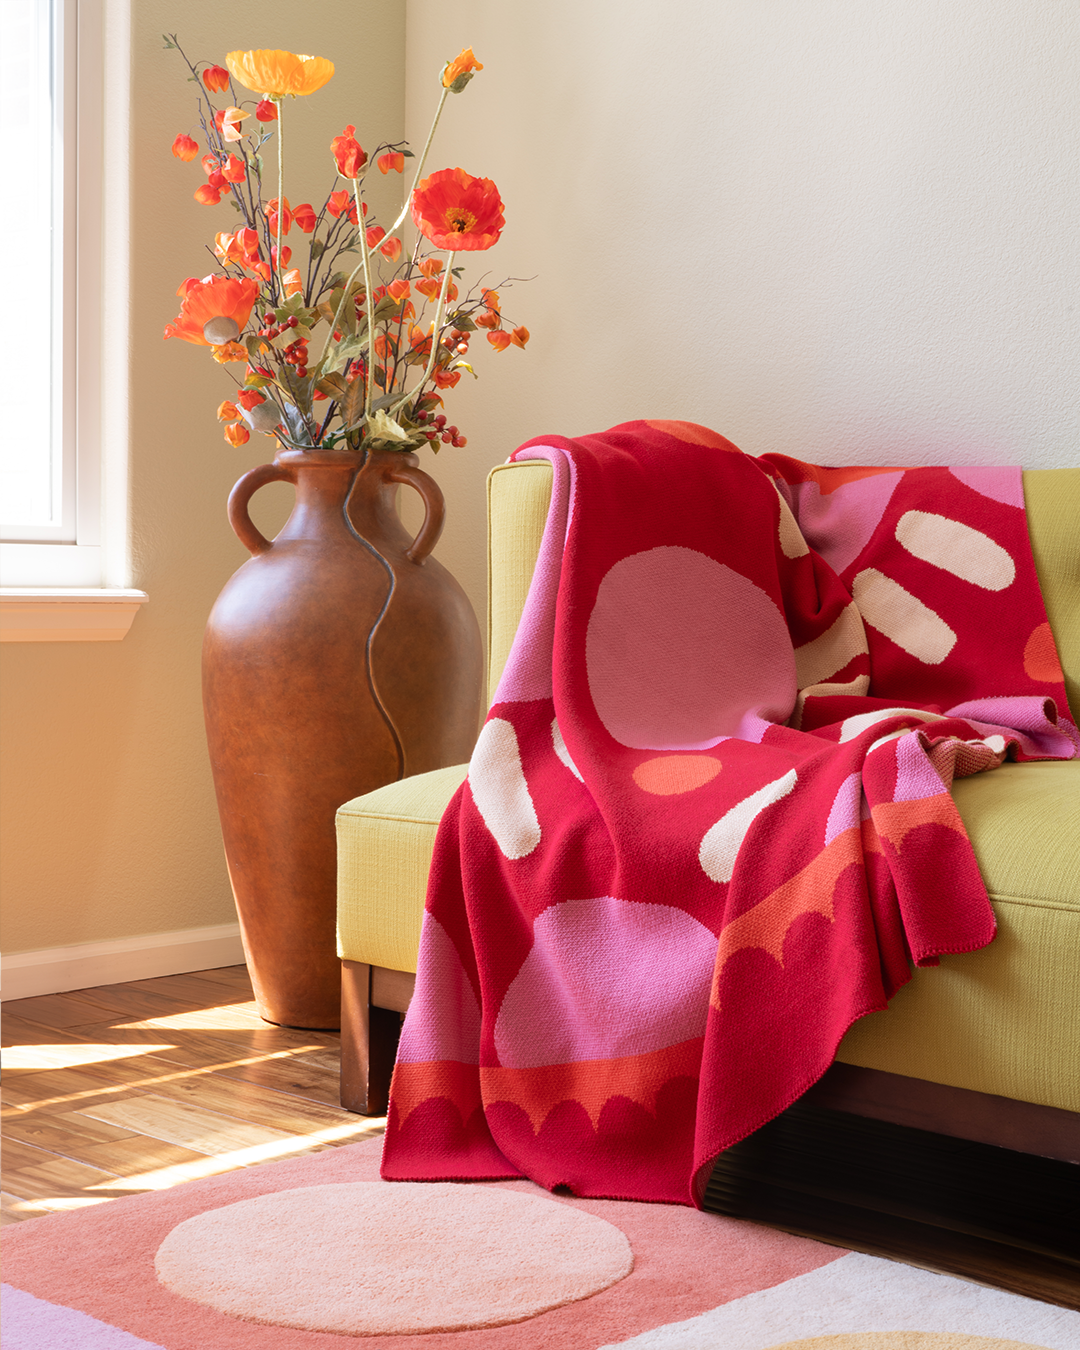 Photo of a living room couch with a red and pink polka dotted blanket splaying out of the corner of the couch. There is also a polka dotted rug on the floor and a giant vase of flowers sitting on the corner.